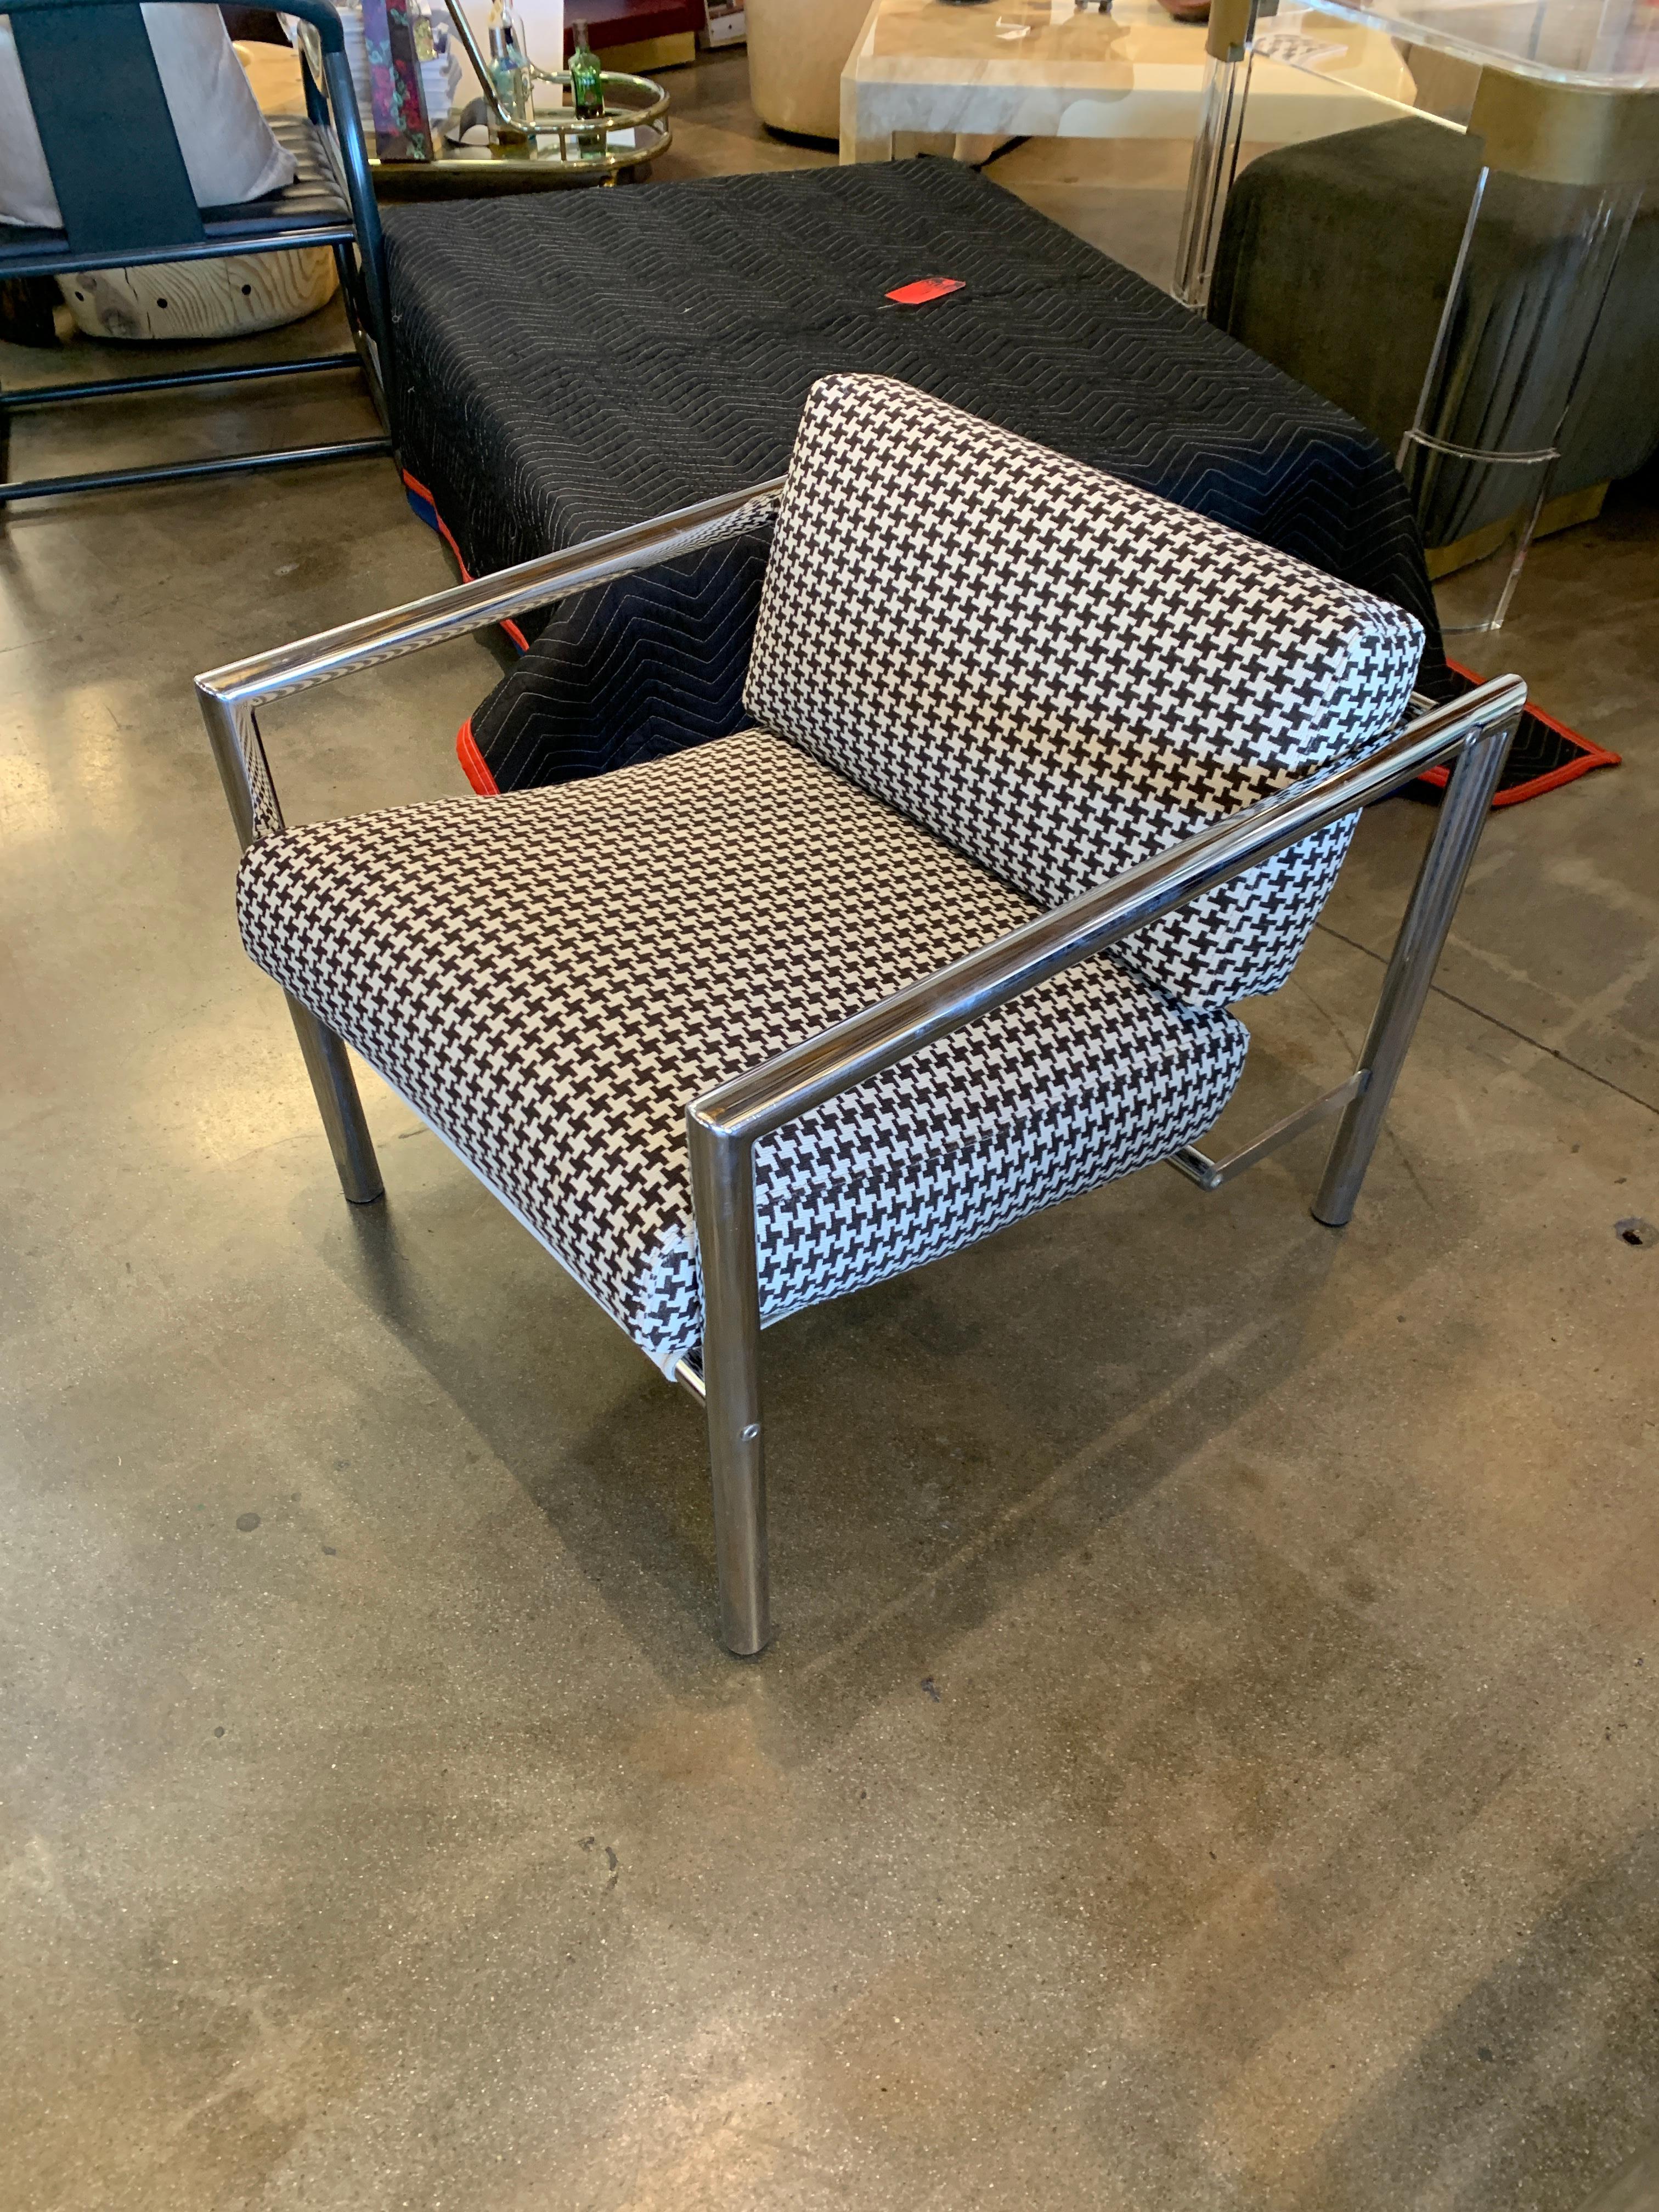 A pair of chrome frame lounge chairs from the 1970s re-upholstered in a houndstooth fabric. They feature canvas slings. The frames have an unusual shape by the bottom rear. The foam has been re-done as well. The chairs are in good vintage condition